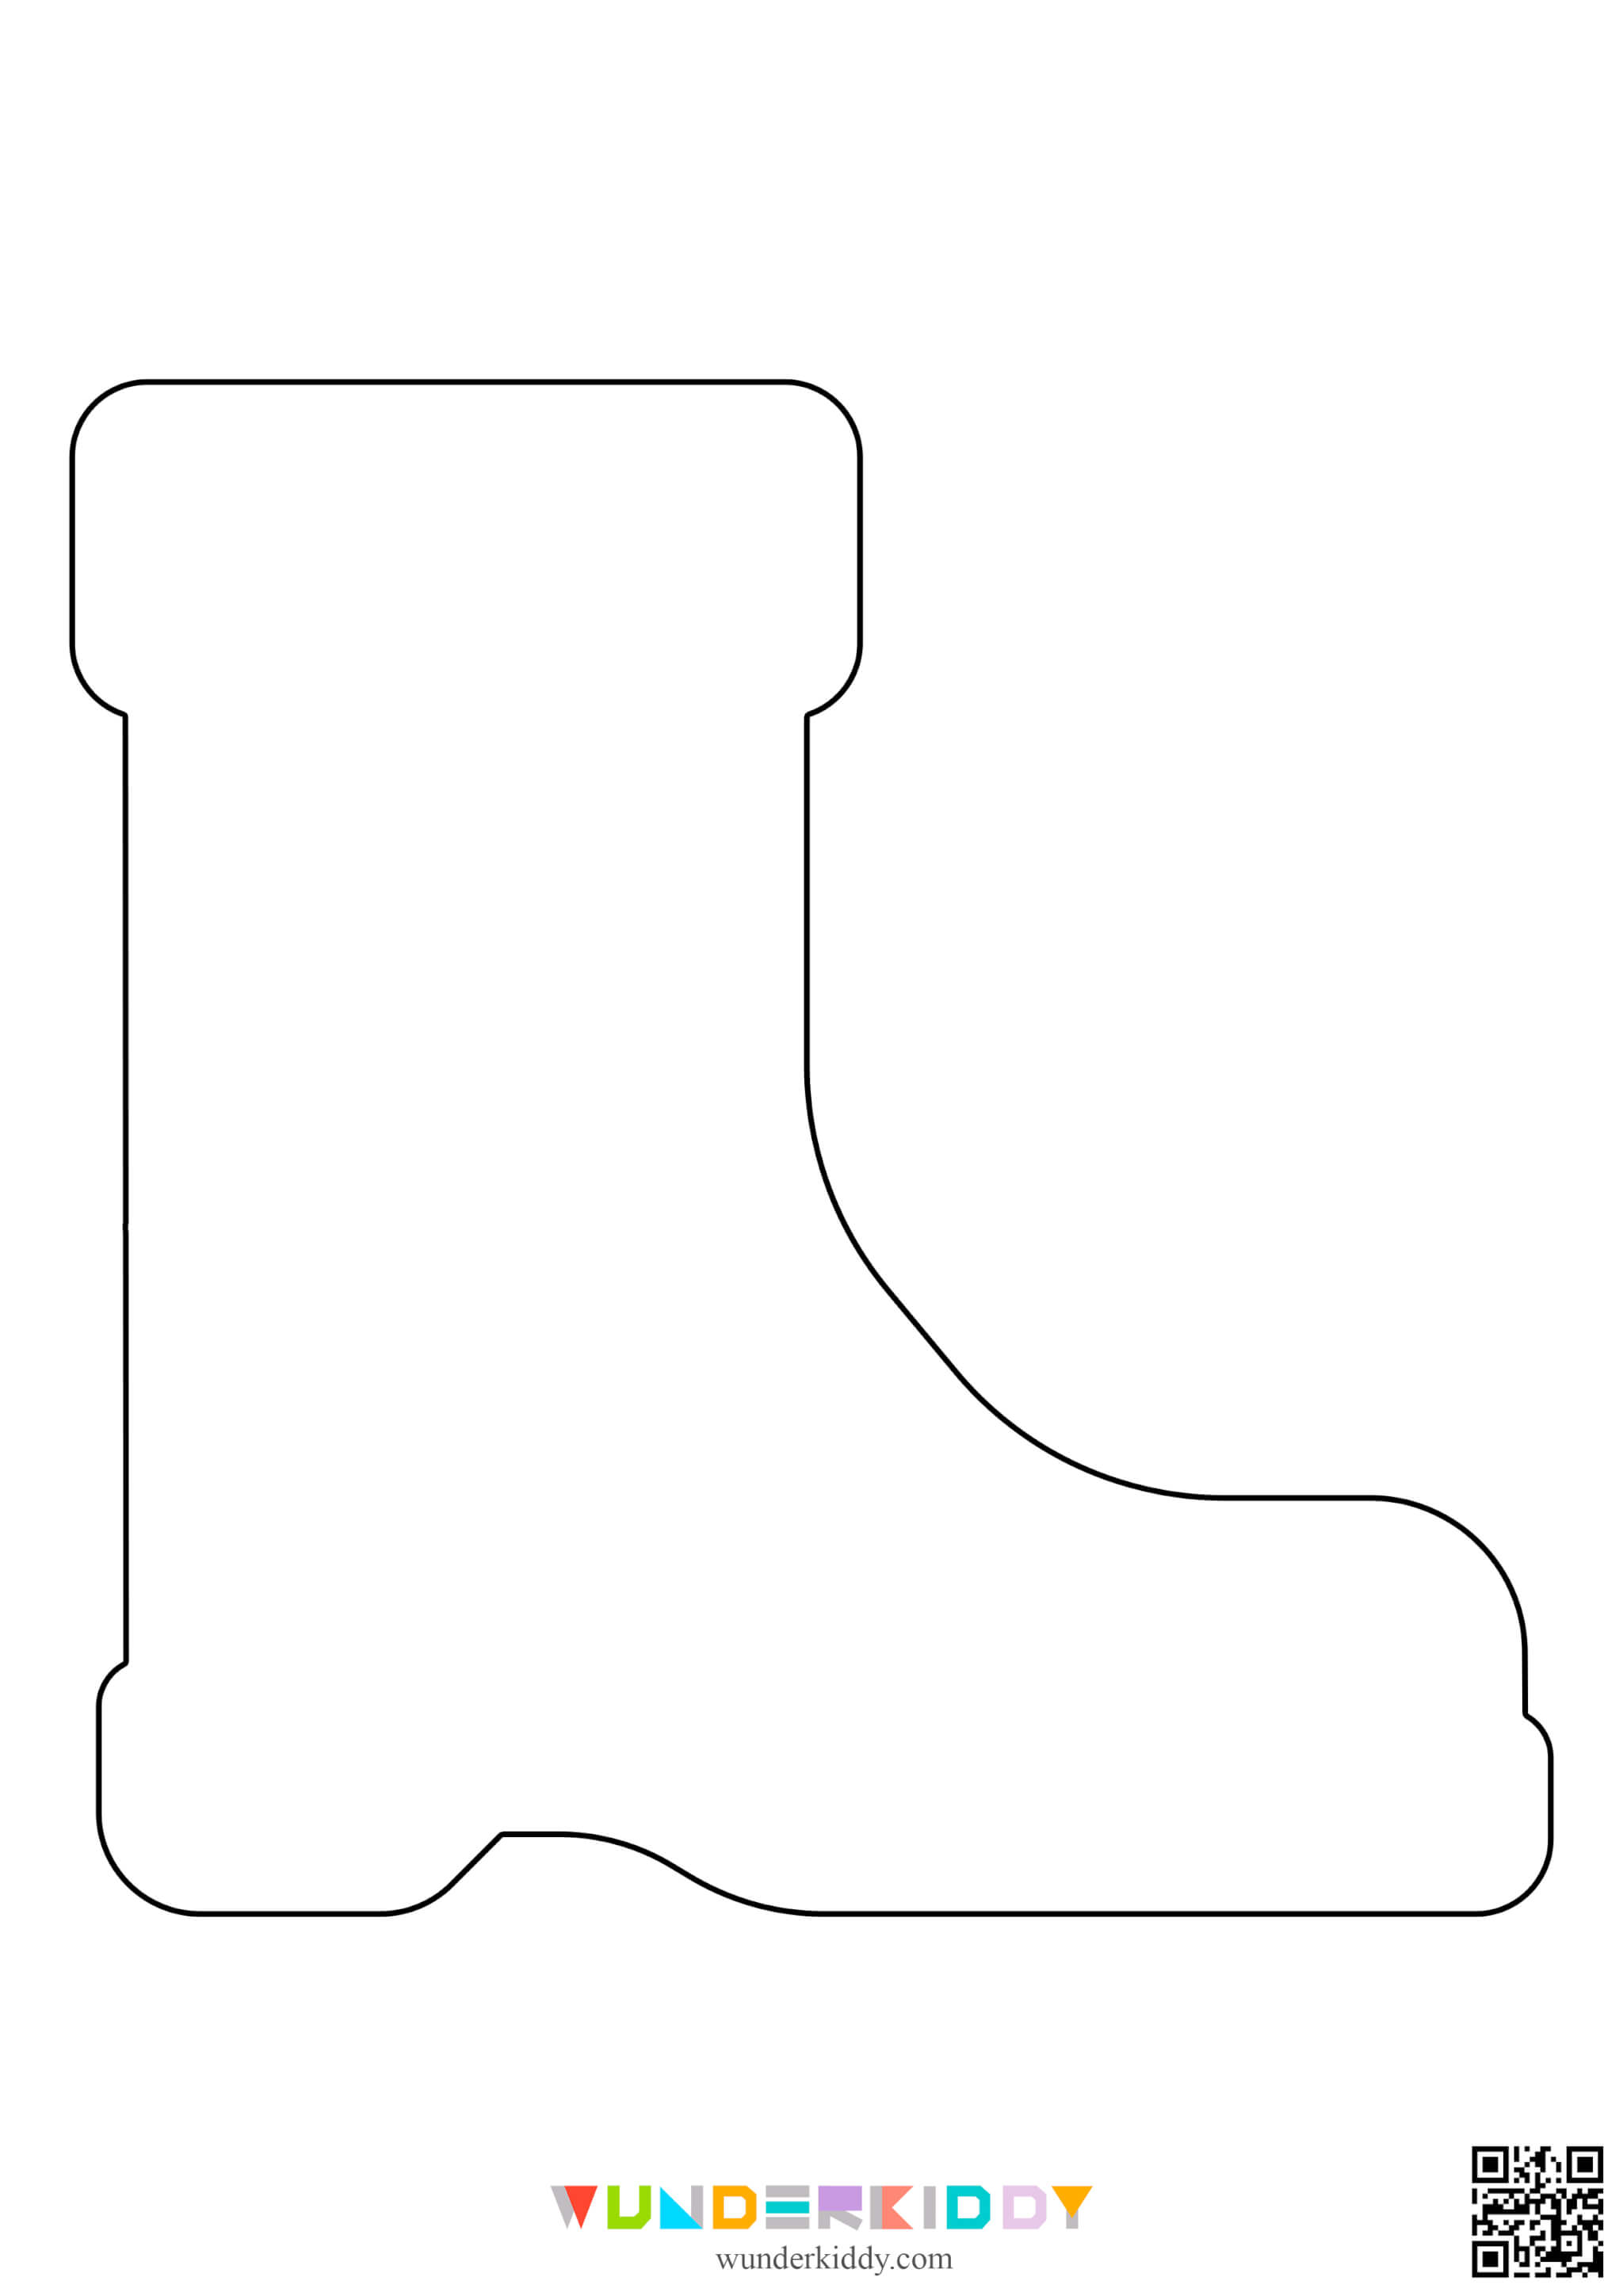 Boots Template - Image 2